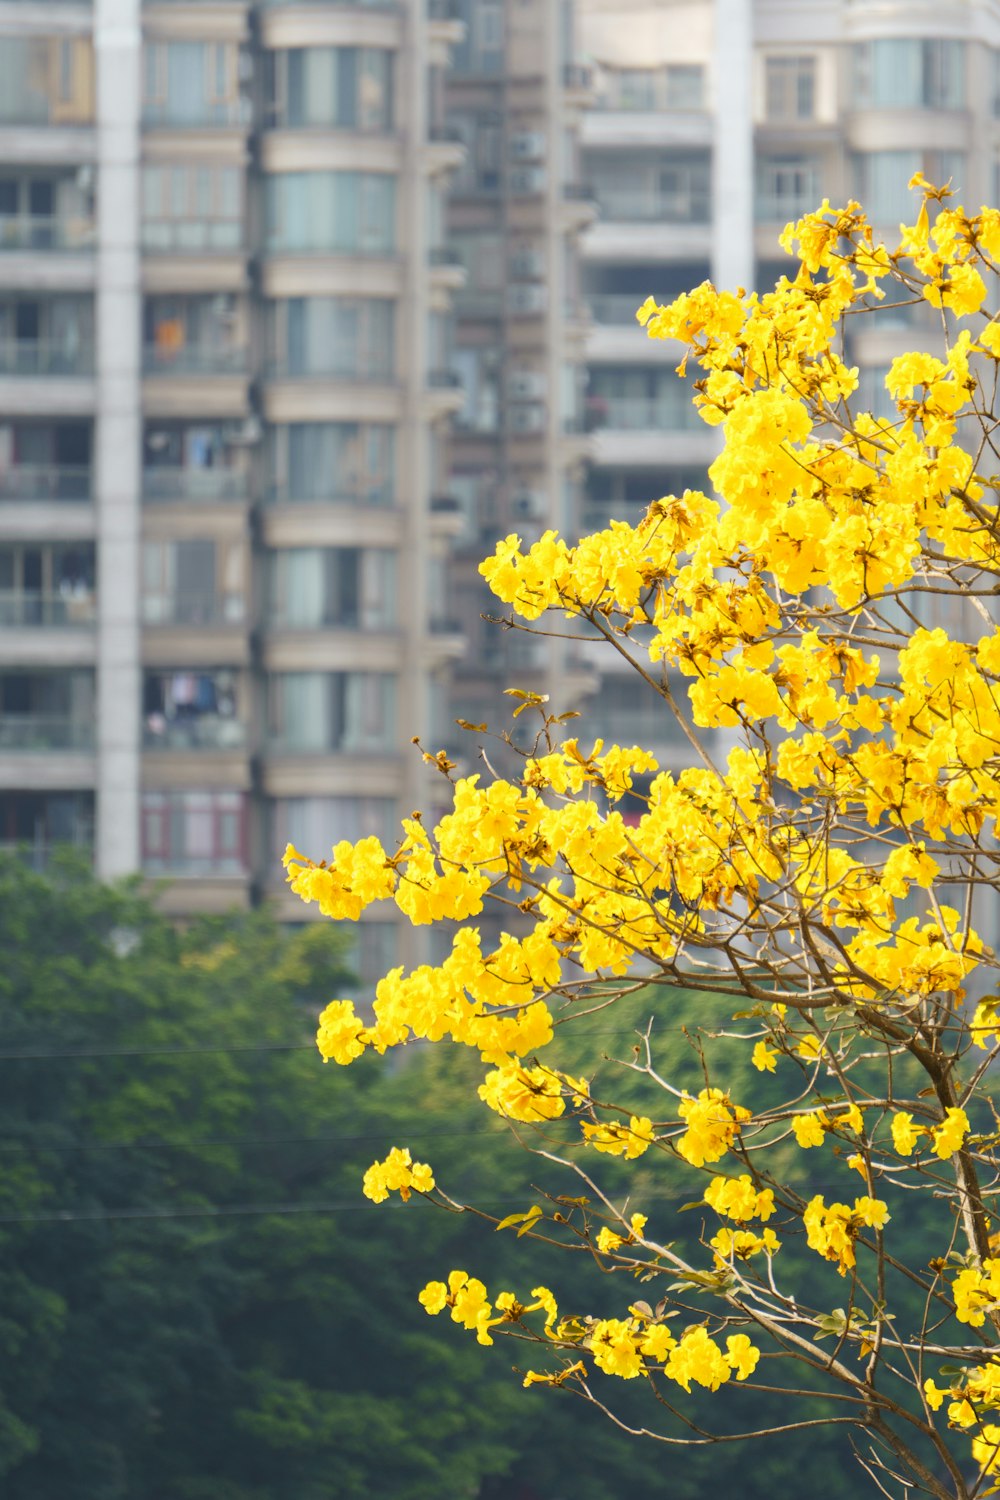 a tree with yellow flowers in front of a tall building